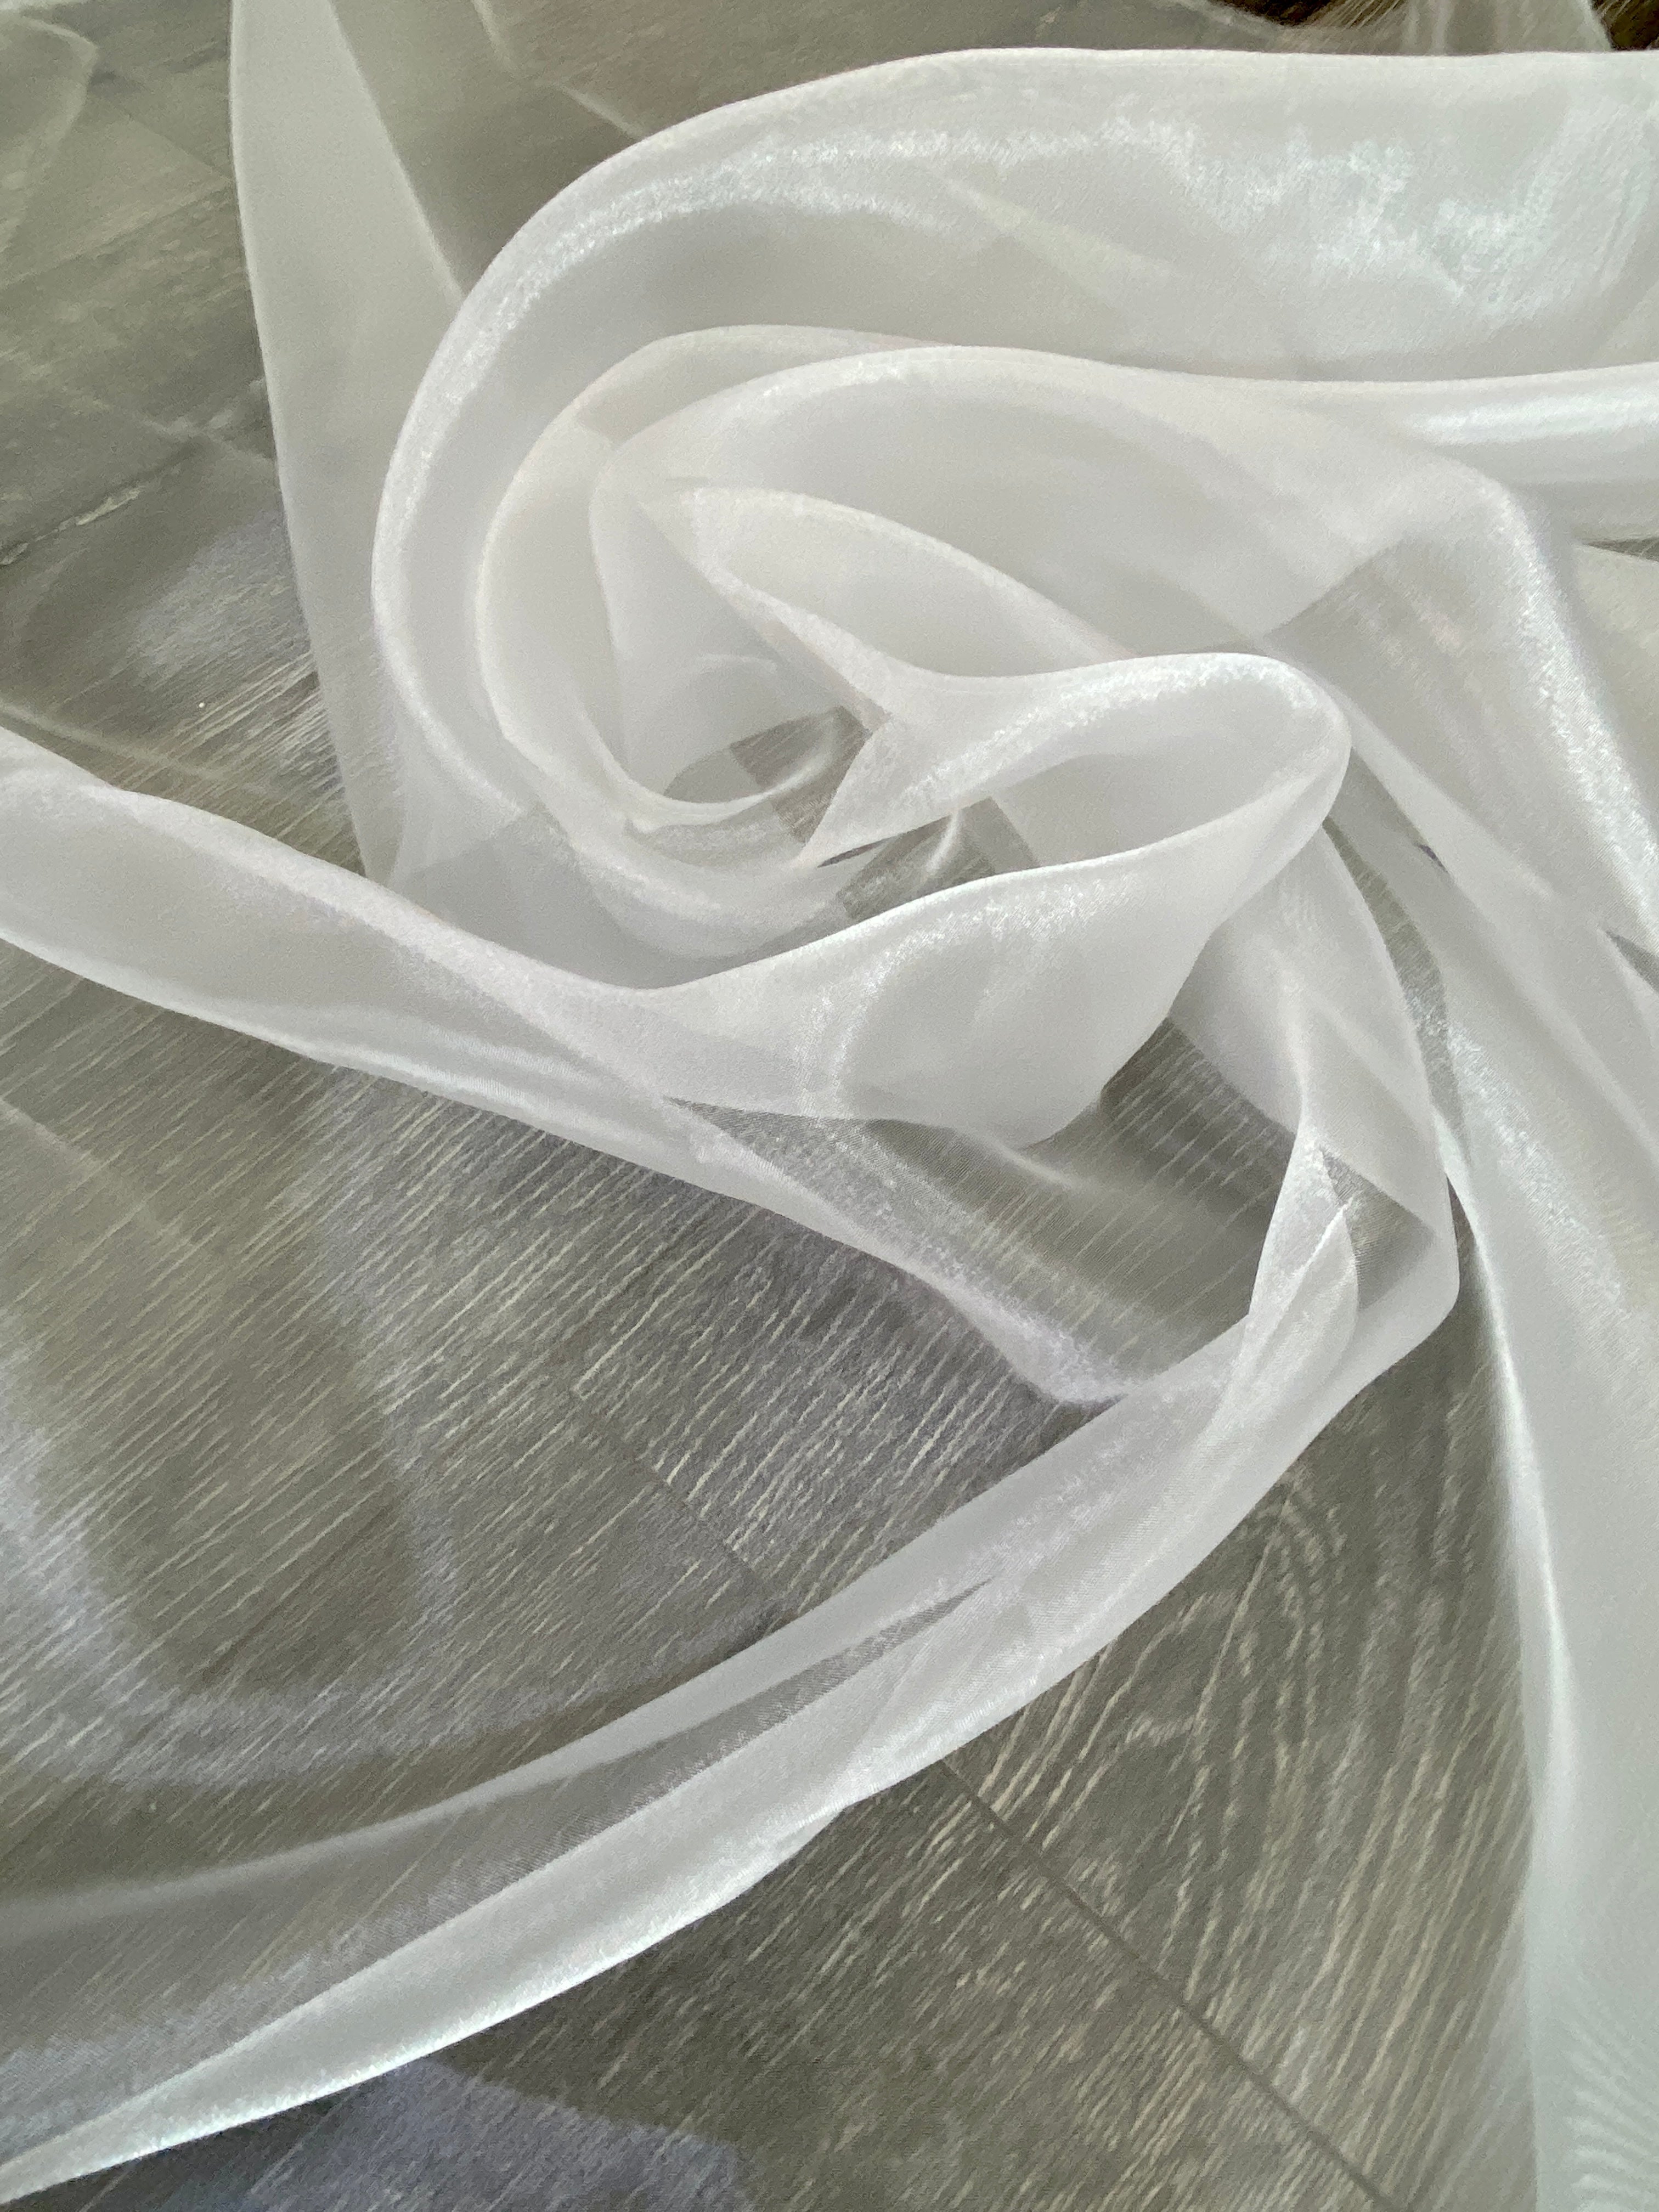  White Crystal Organza, White Crystal Organza for woman, off White Crystal Organza, milky White Crystal Organza, bright White Crystal Organza, White Crystal Organza for bride, Crystal Organza for party wear, premium Crystal Organza, Crystal Organza in low price